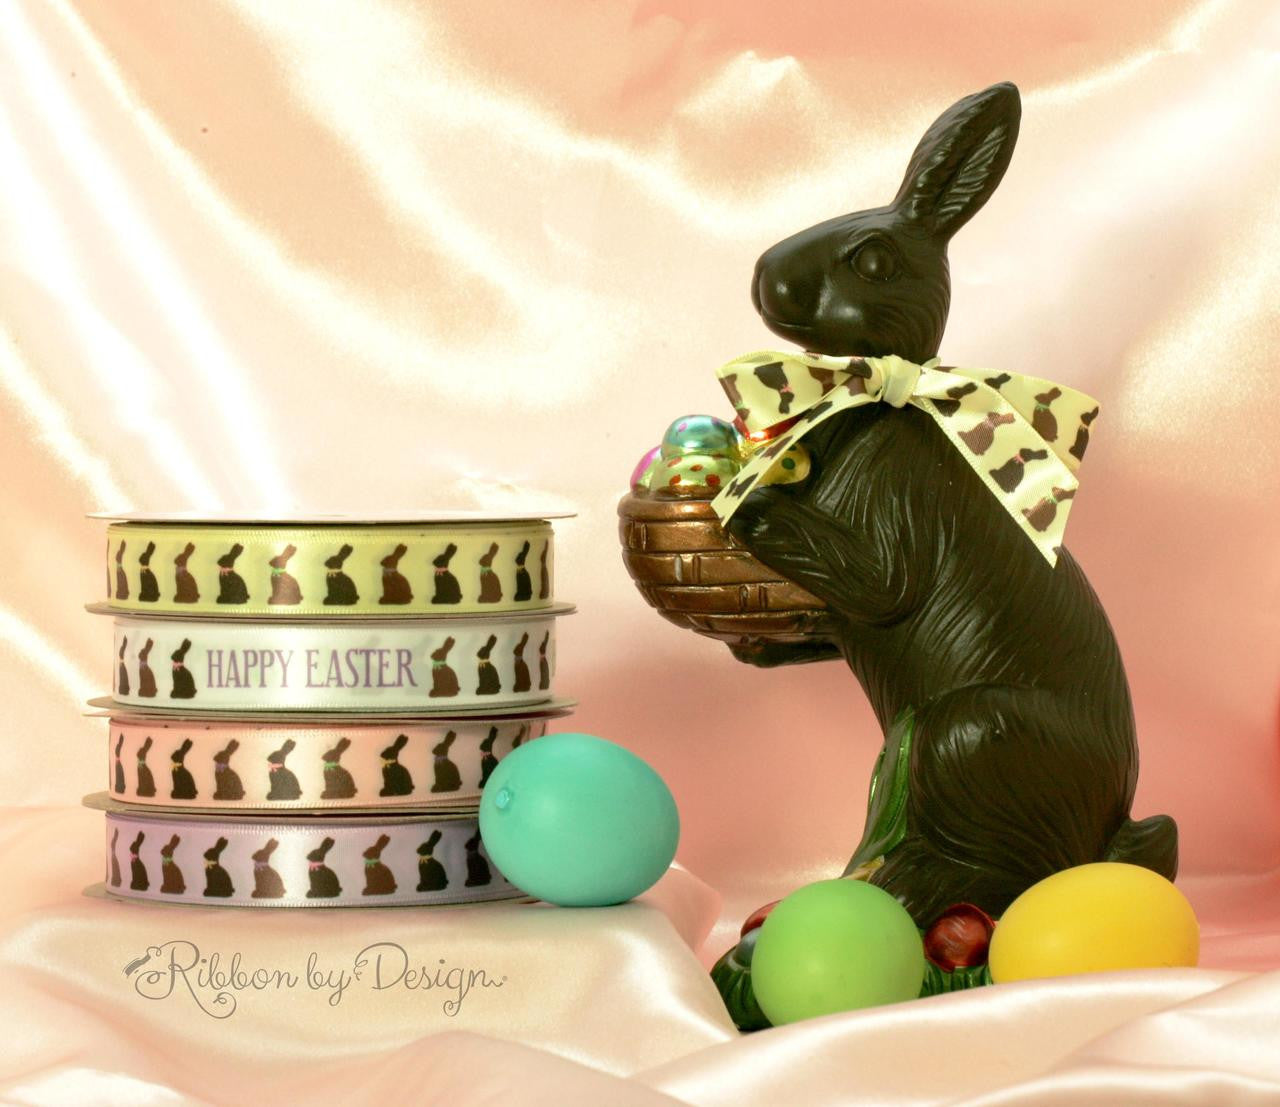 There is nothing as sweet as a chocolate bunny sporting a fun chocolate bunny bow!